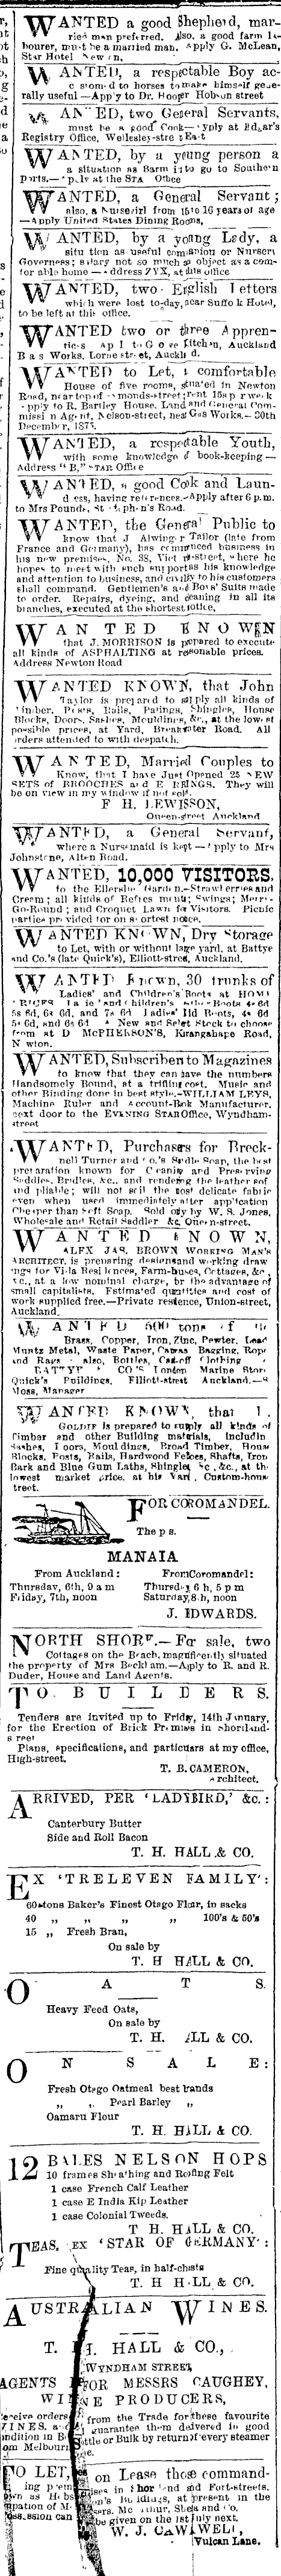 Papers Past Newspapers Auckland Star 4 January 1876 Page 3 Advertisements Column 2